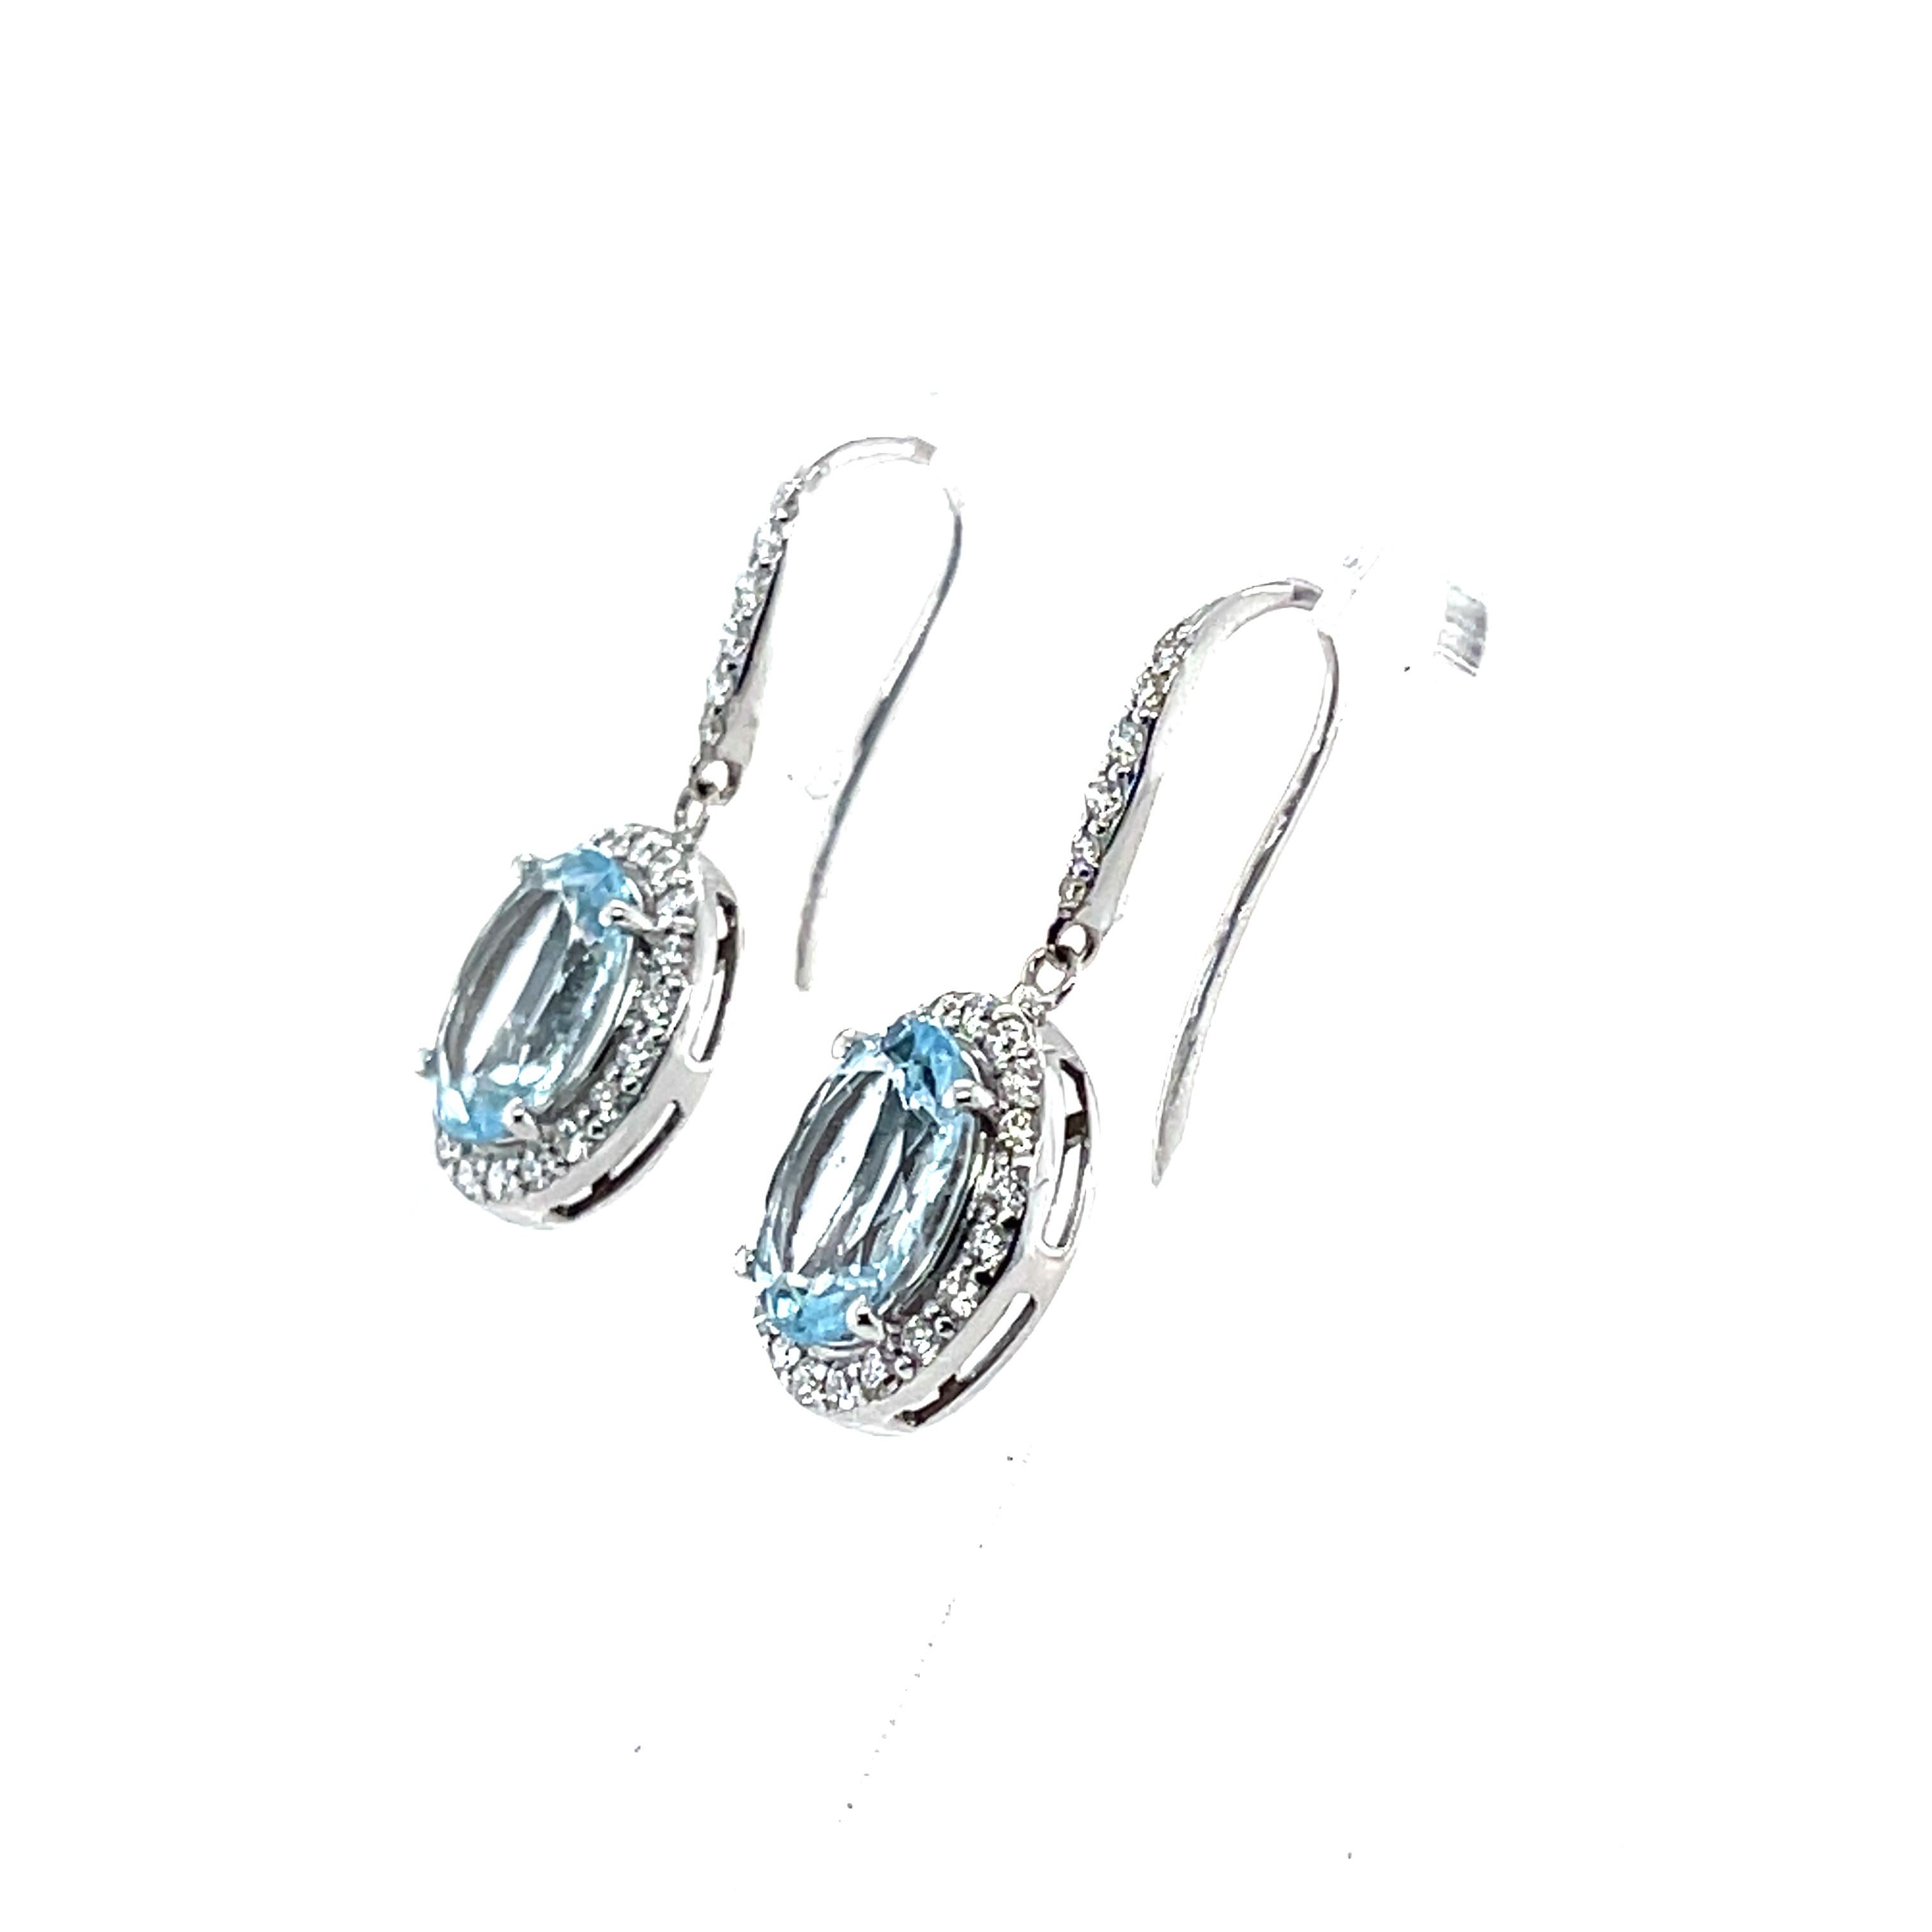 A Stunning pair of 14CT white gold oval cut Aquamarine and round brilliant cut diamonds on a beautifully crafted shepherds hook earrings. 

Aquamarine Weight: 3.76ct
Aquamarine Colour: 